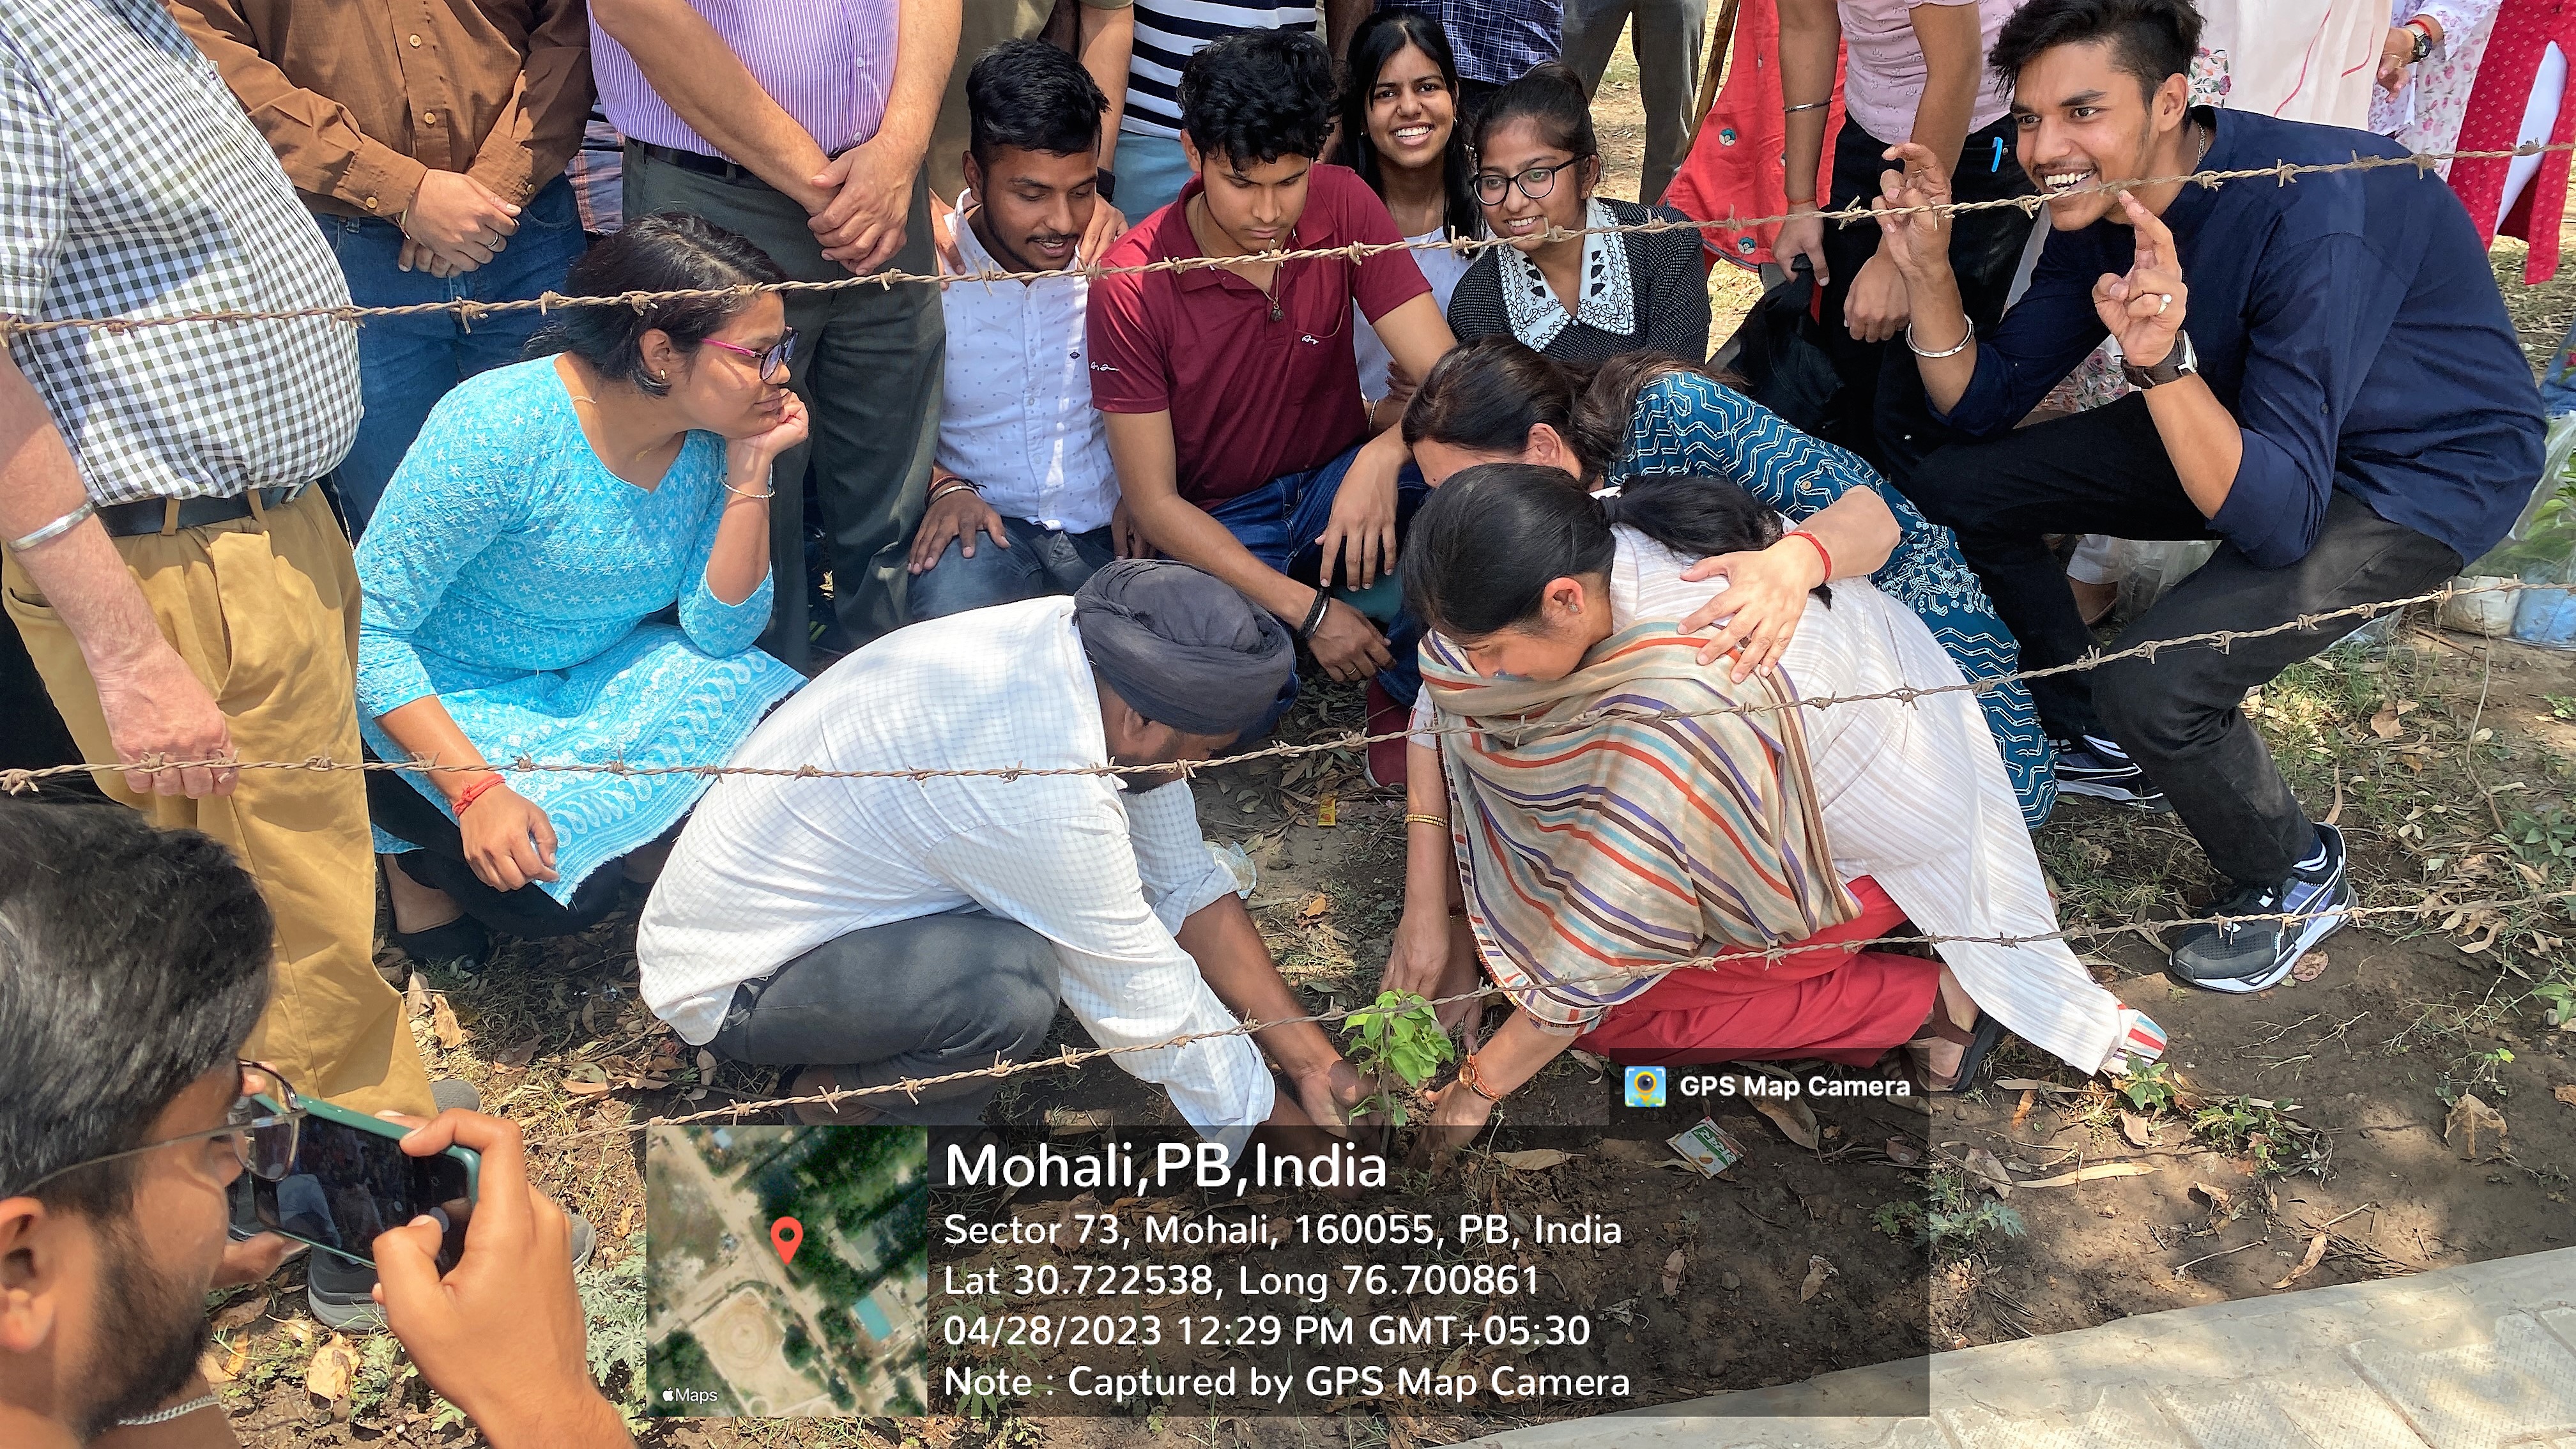 Plantation was done by Officers, Faculty Member, Staff & Students at IKGPTU Mohali Campus to Keep the Earth Green